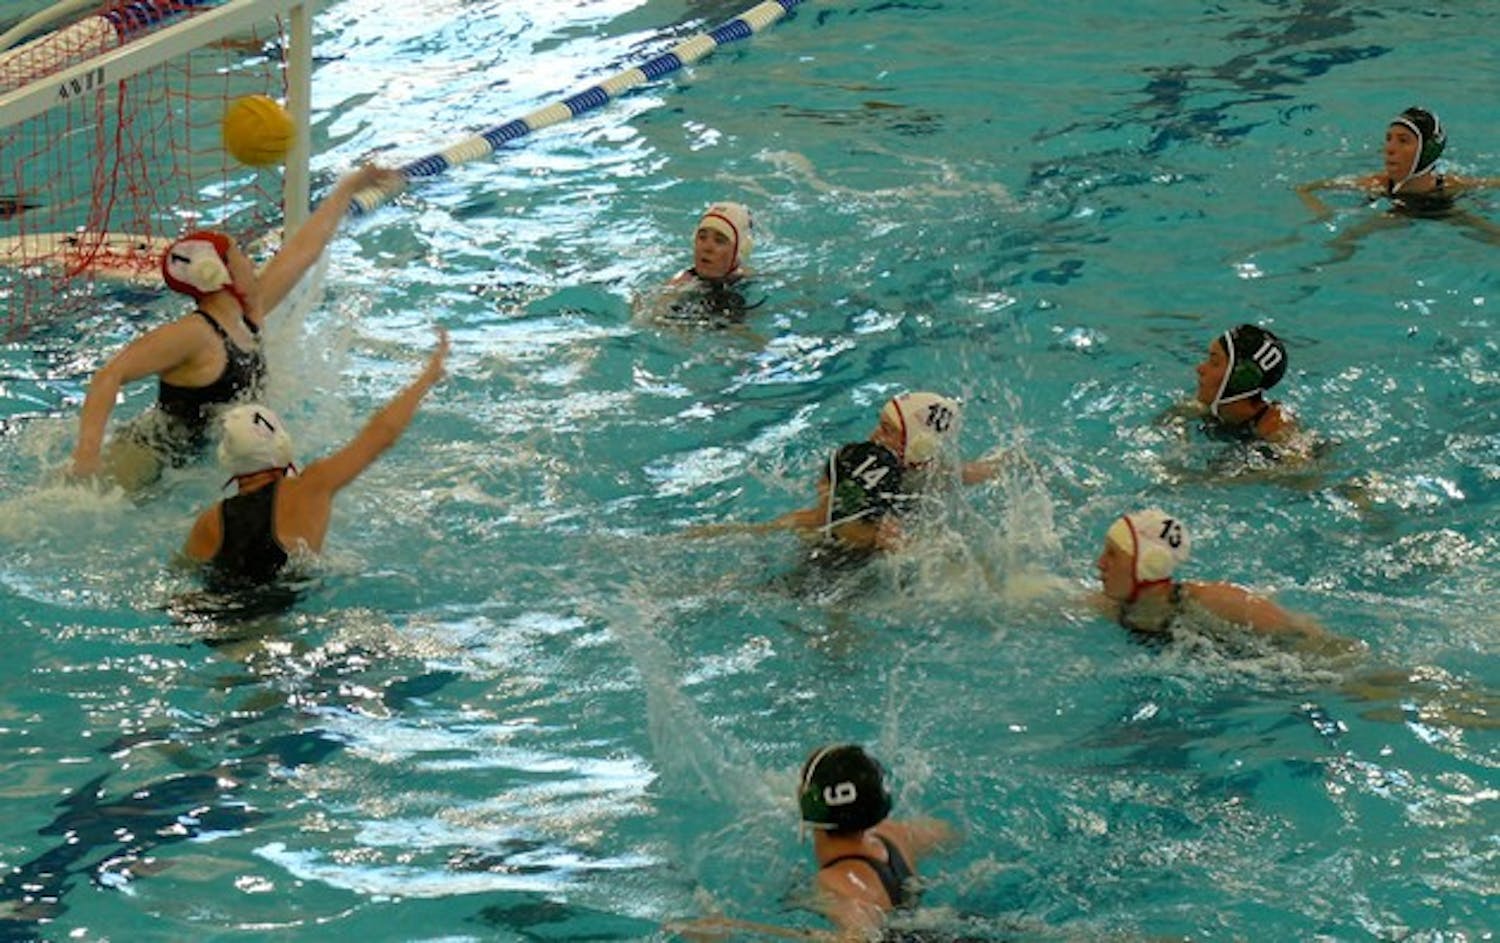 The women's water polo team clinched first place in regional championship in April to earn a bid to nationals.